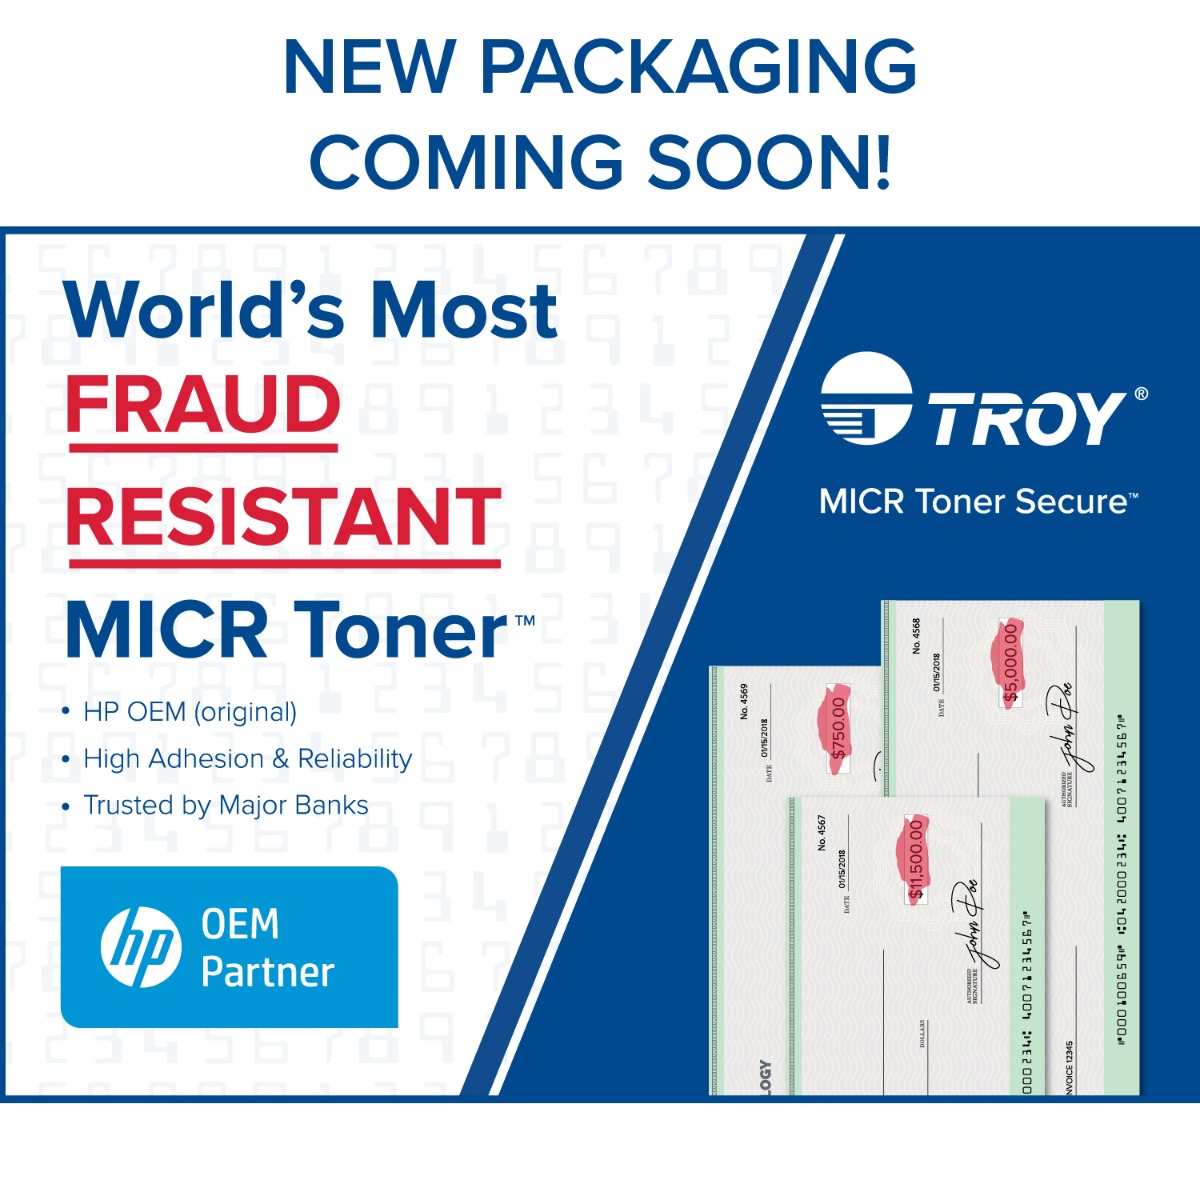 TROY Precision MICR Toner Secure Standard Yield Cartridge for Lexmark ST 9630/9650